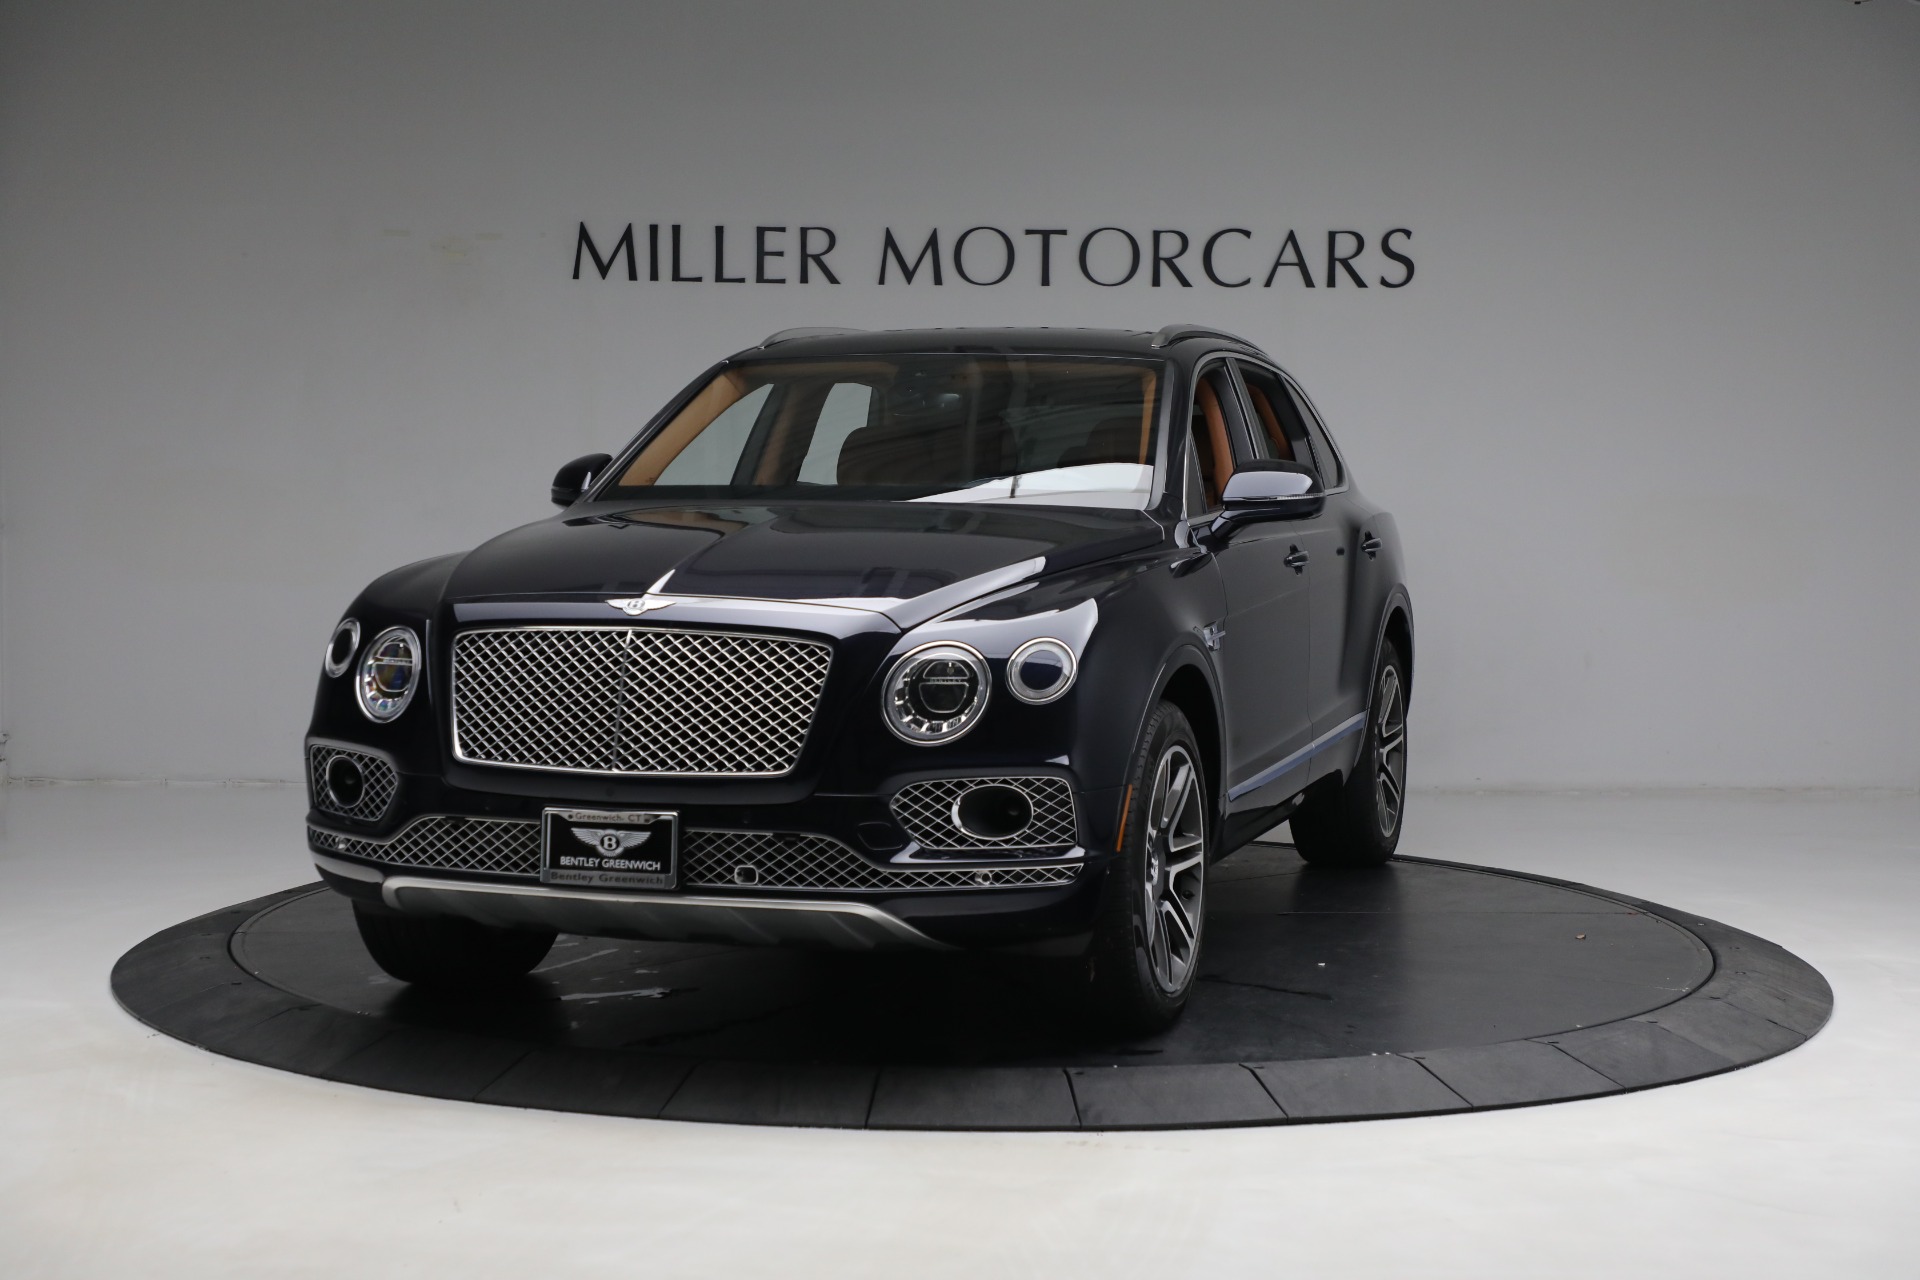 Used 2018 Bentley Bentayga W12 Signature for sale $109,900 at Pagani of Greenwich in Greenwich CT 06830 1